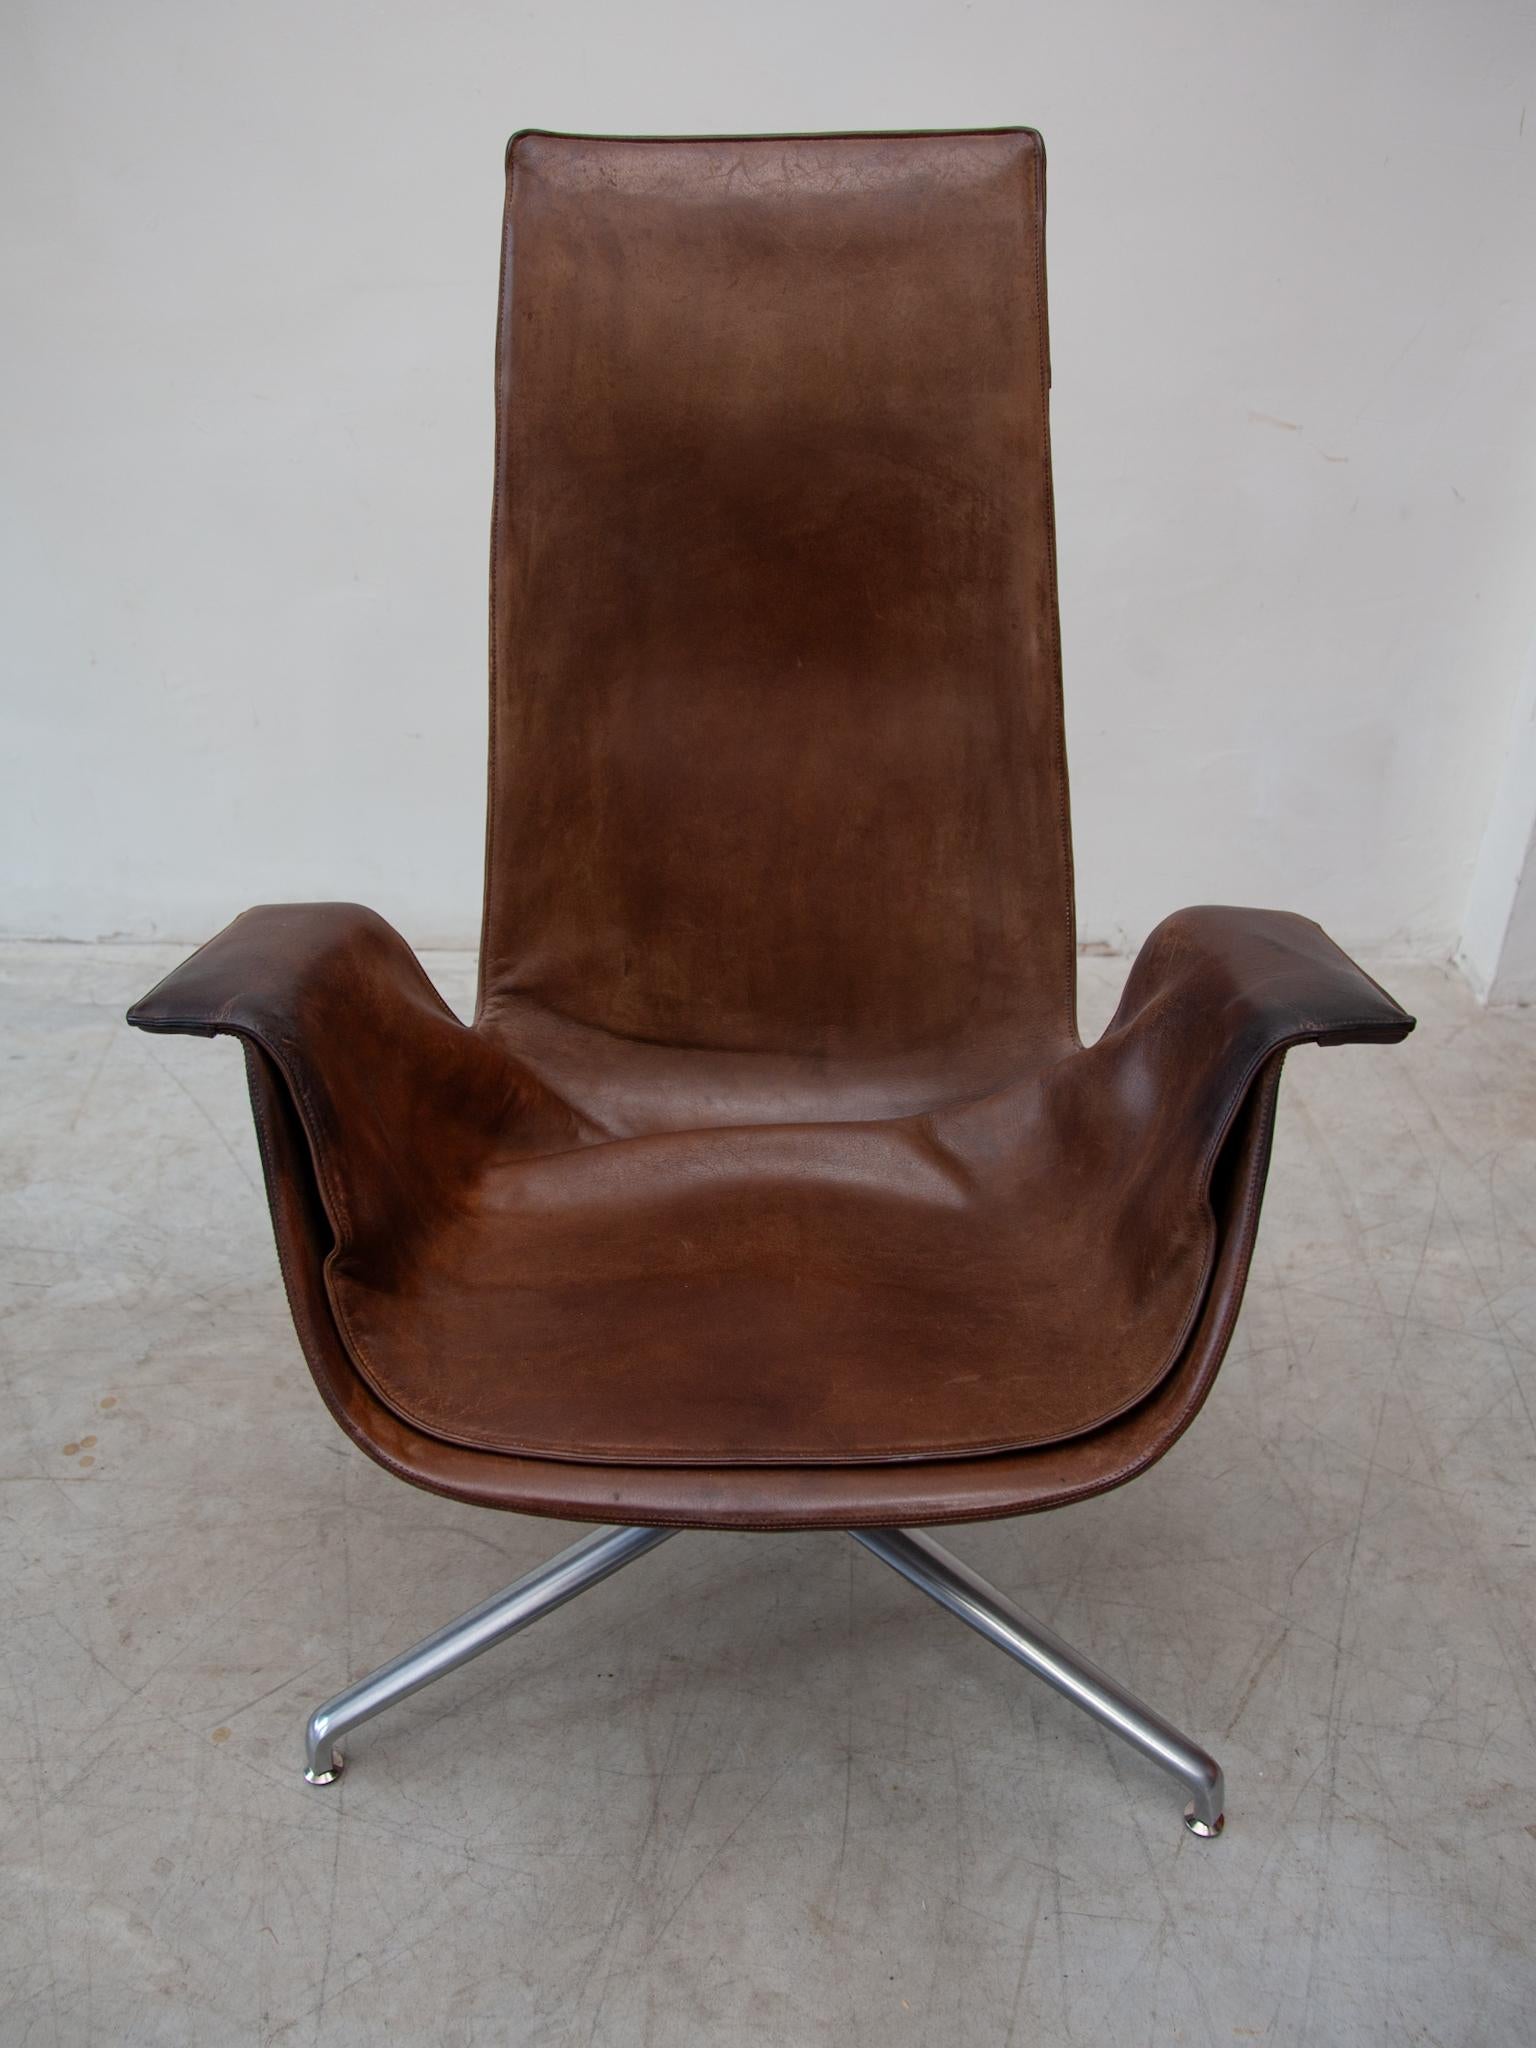 Mid-20th Century High Back Tulip Swivel Chair by Fabricius, Kastholm for Kill, Model Fk 6725 For Sale